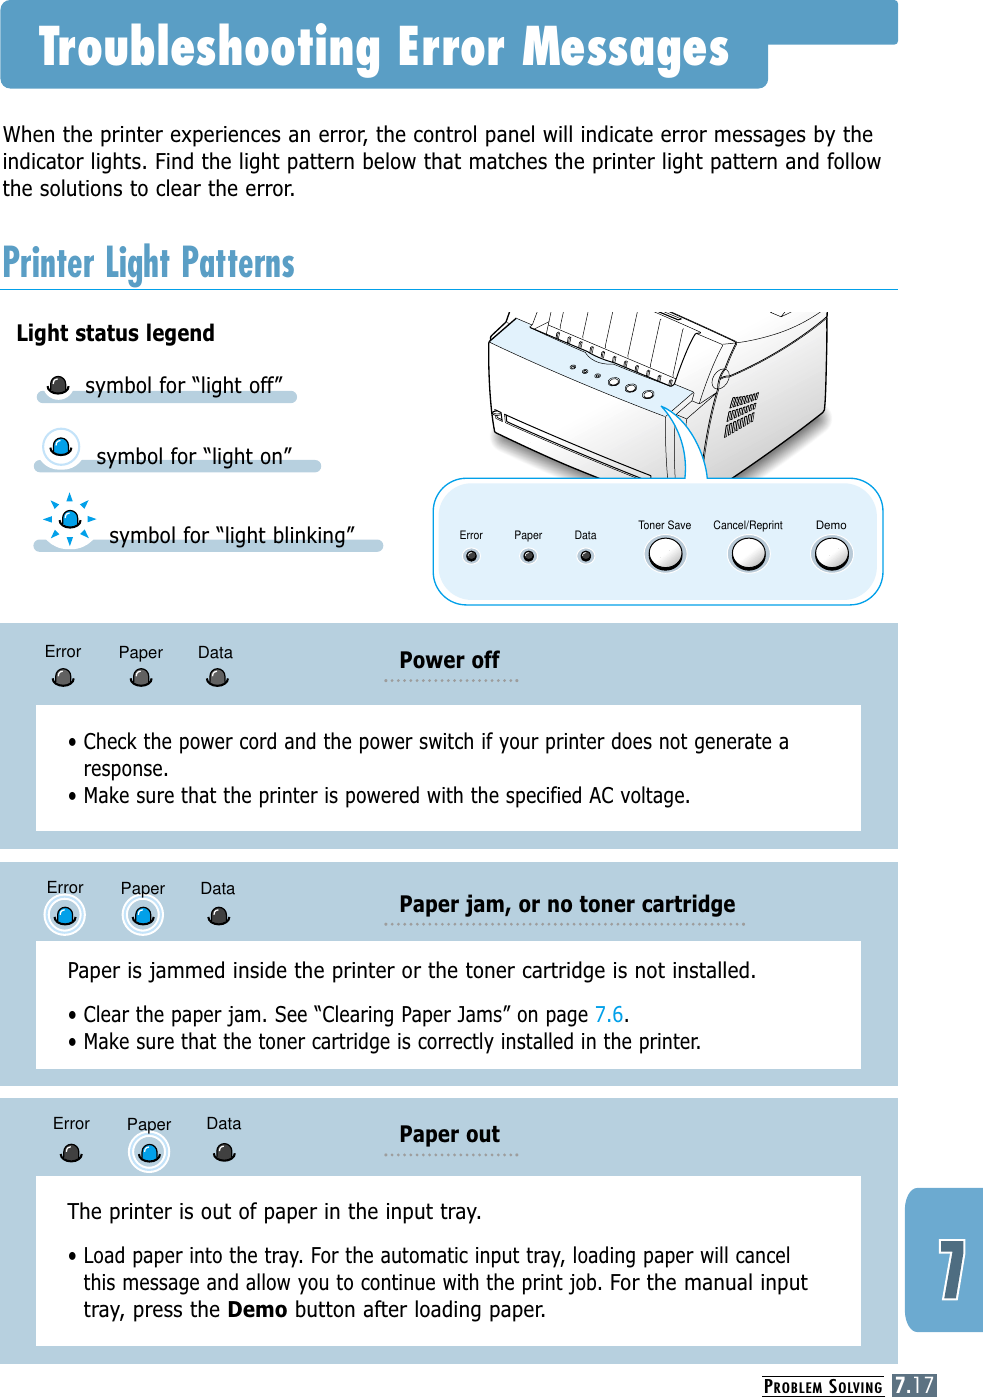 PROBLEM SOLVING7.17Toner Save Cancel/ReprintDemoDataPaperErrorWhen the printer experiences an error, the control panel will indicate error messages by theindicator lights. Find the light pattern below that matches the printer light pattern and followthe solutions to clear the error.Troubleshooting Error MessagesPrinter Light PatternsLight status legendsymbol for “light on”symbol for “light blinking”symbol for “light off”• Check the power cord and the power switch if your printer does not generate aresponse.• Make sure that the printer is powered with the specified AC voltage.Power offError Paper DataThe printer is out of paper in the input tray. • Load paper into the tray. For the automatic input tray, loading paper will cancelthis message and allow you to continue with the print job. For the manual inputtray, press the Demo button after loading paper.Paper out DataError PaperPaper is jammed inside the printer or the toner cartridge is not installed. • Clear the paper jam. See “Clearing Paper Jams” on page 7.6.• Make sure that the toner cartridge is correctly installed in the printer.Paper jam, or no toner cartridgeDataError Paper